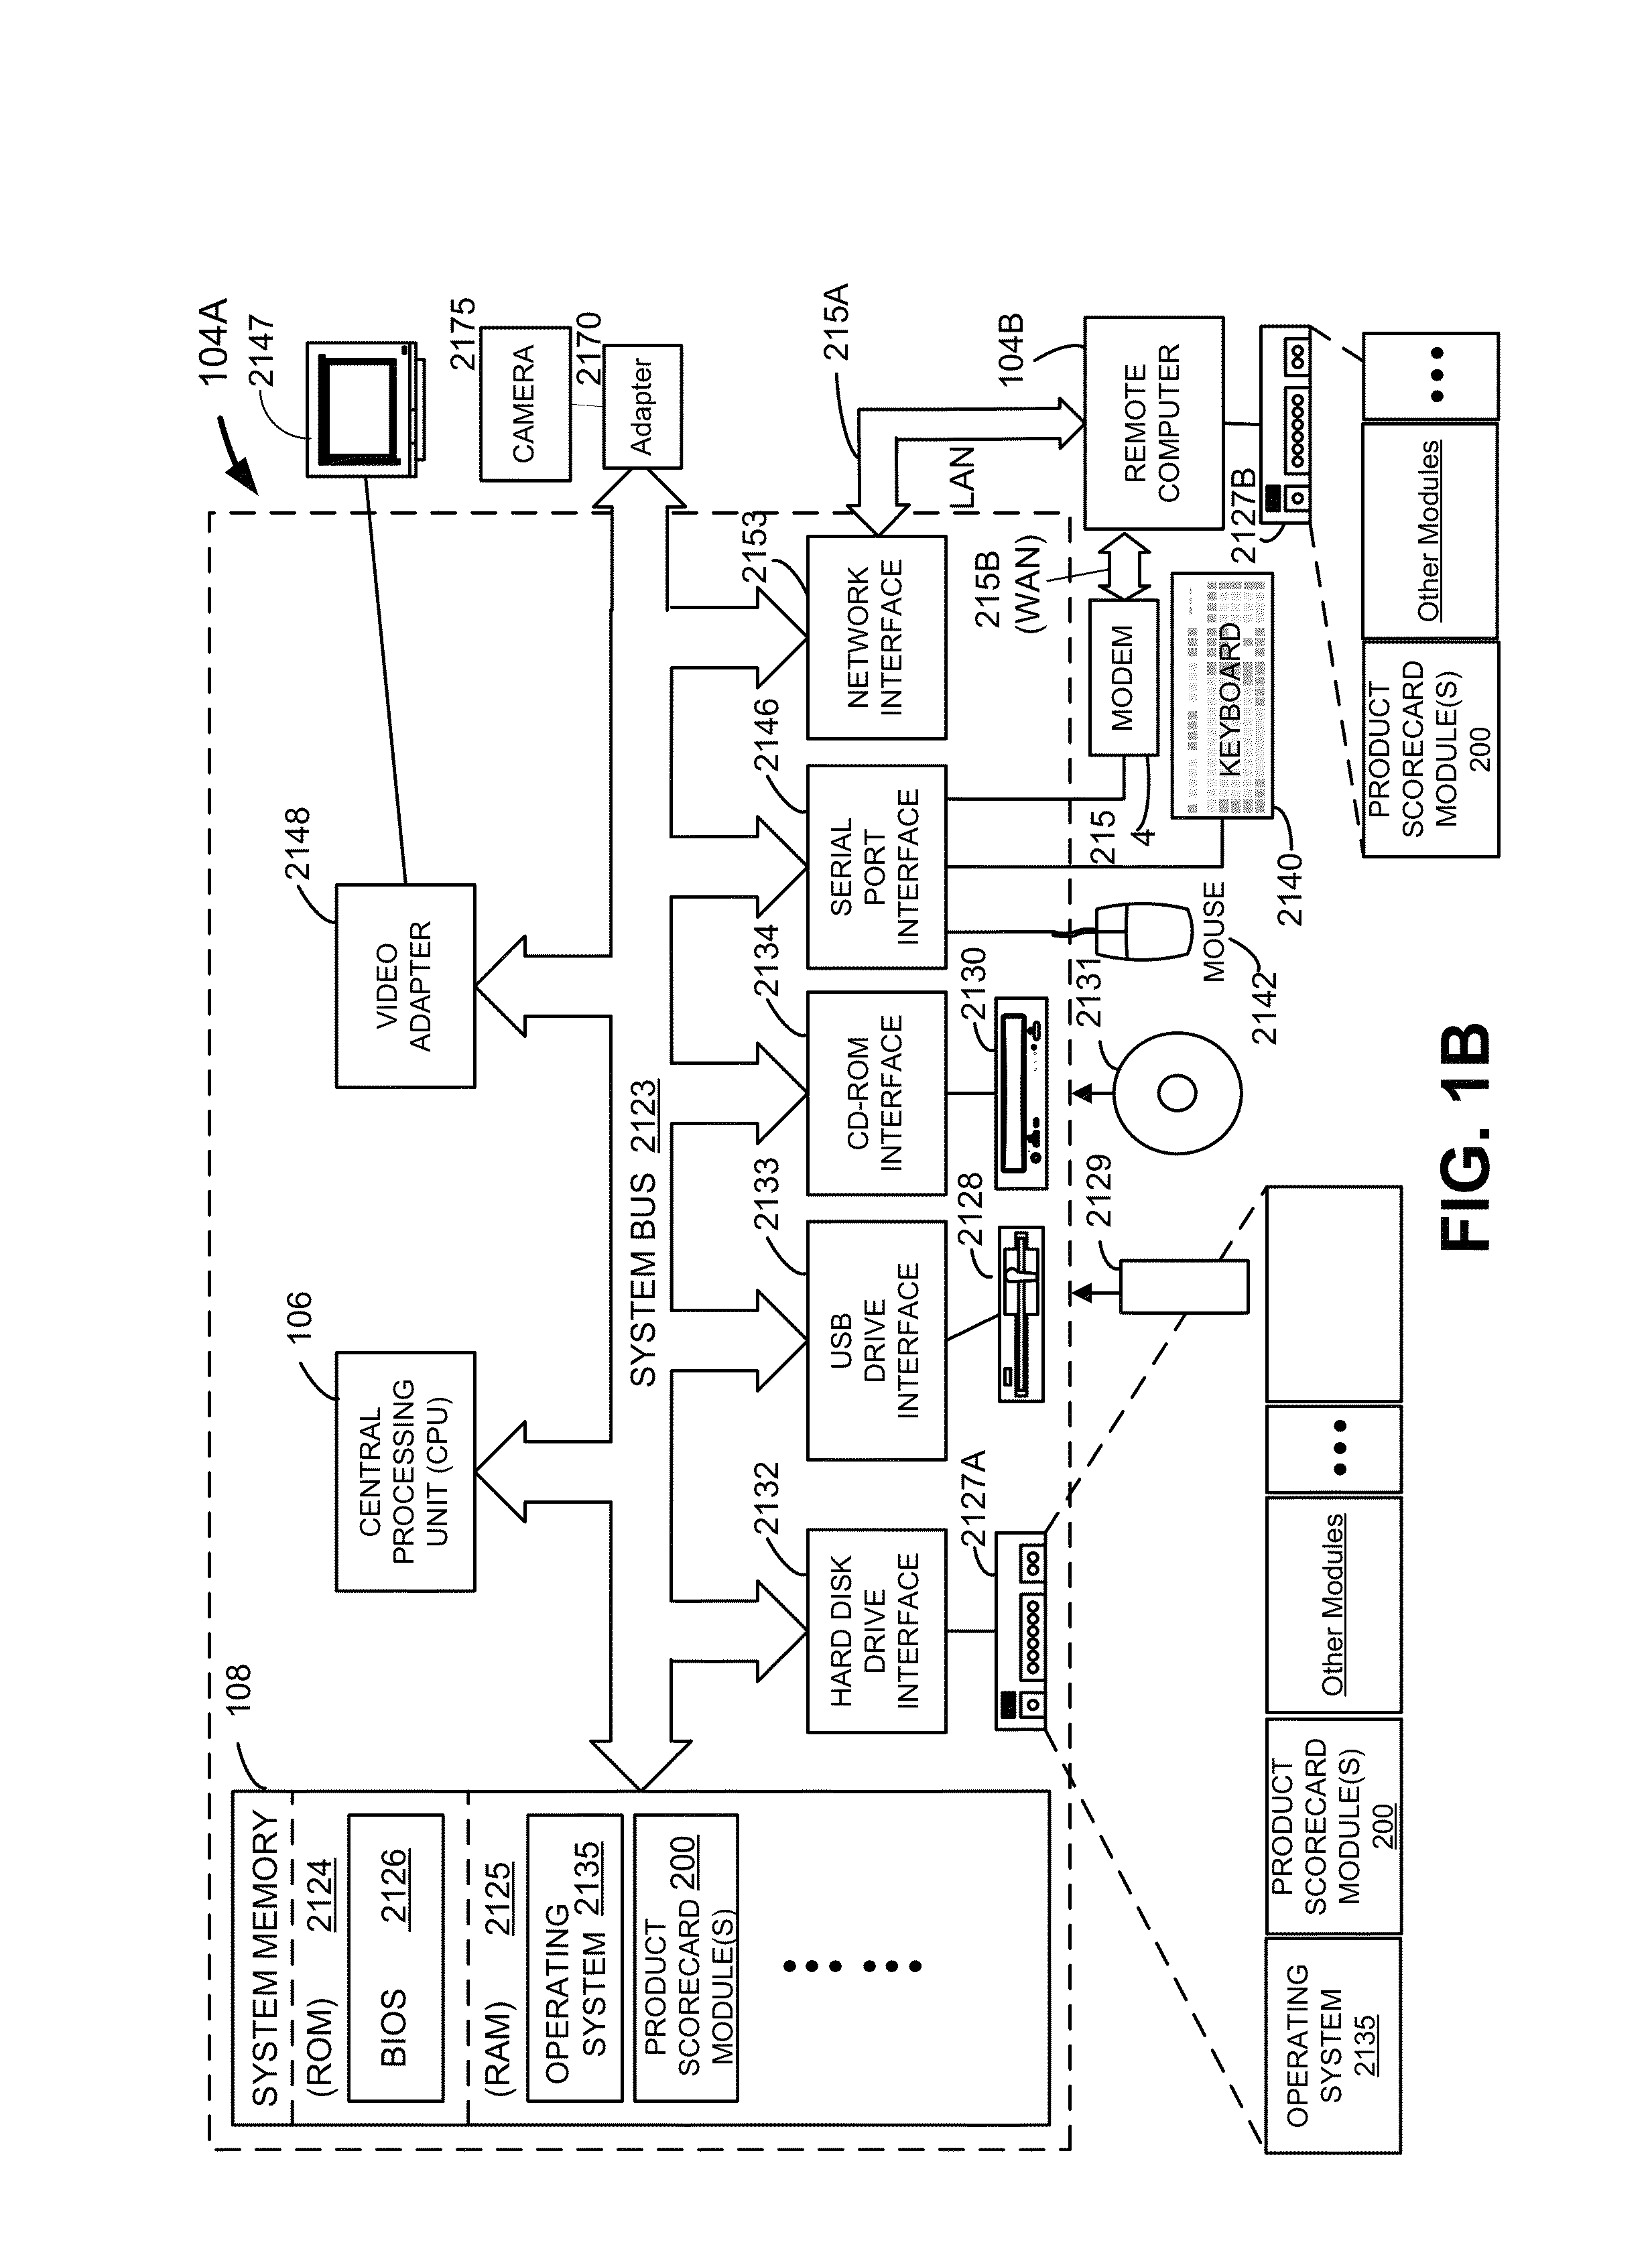 Computer system and method for ctq-based product testing, analysis, and scoring